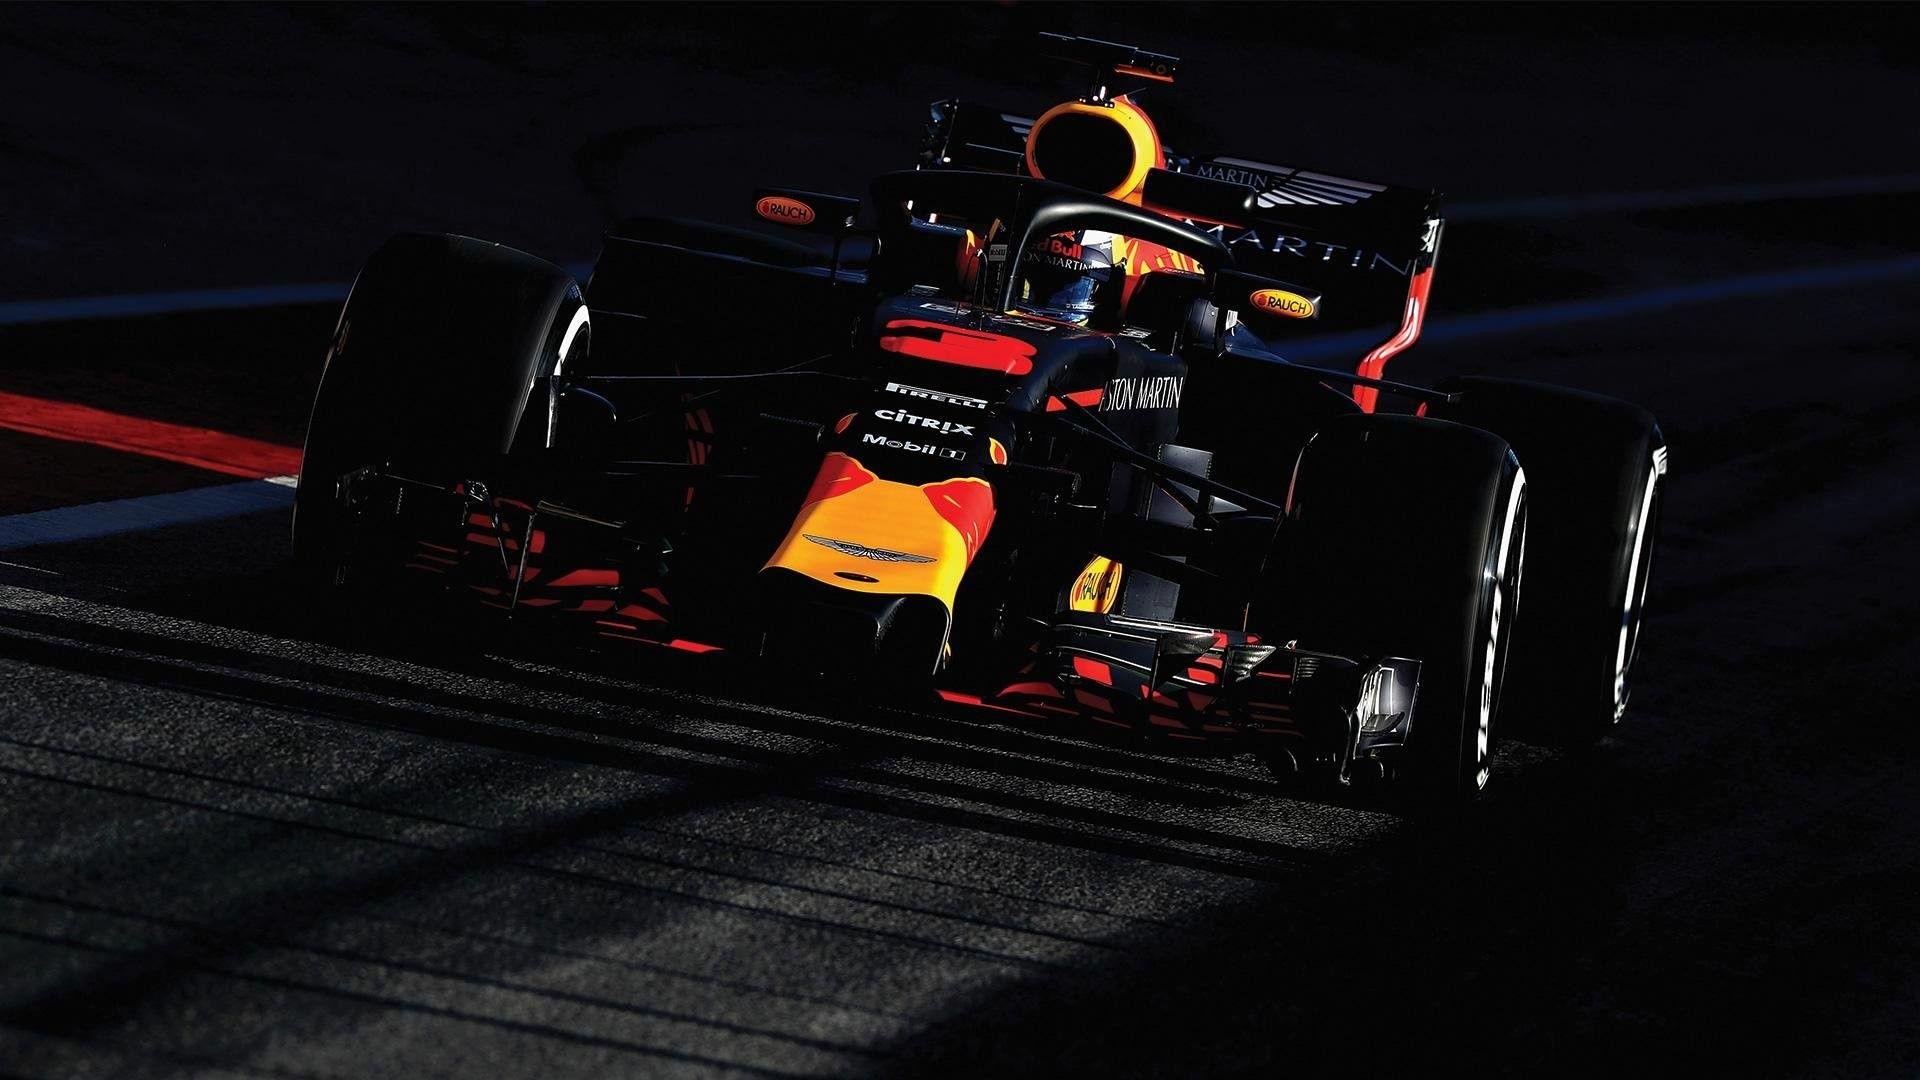 Redbull F1 Wallpapers - Top Free